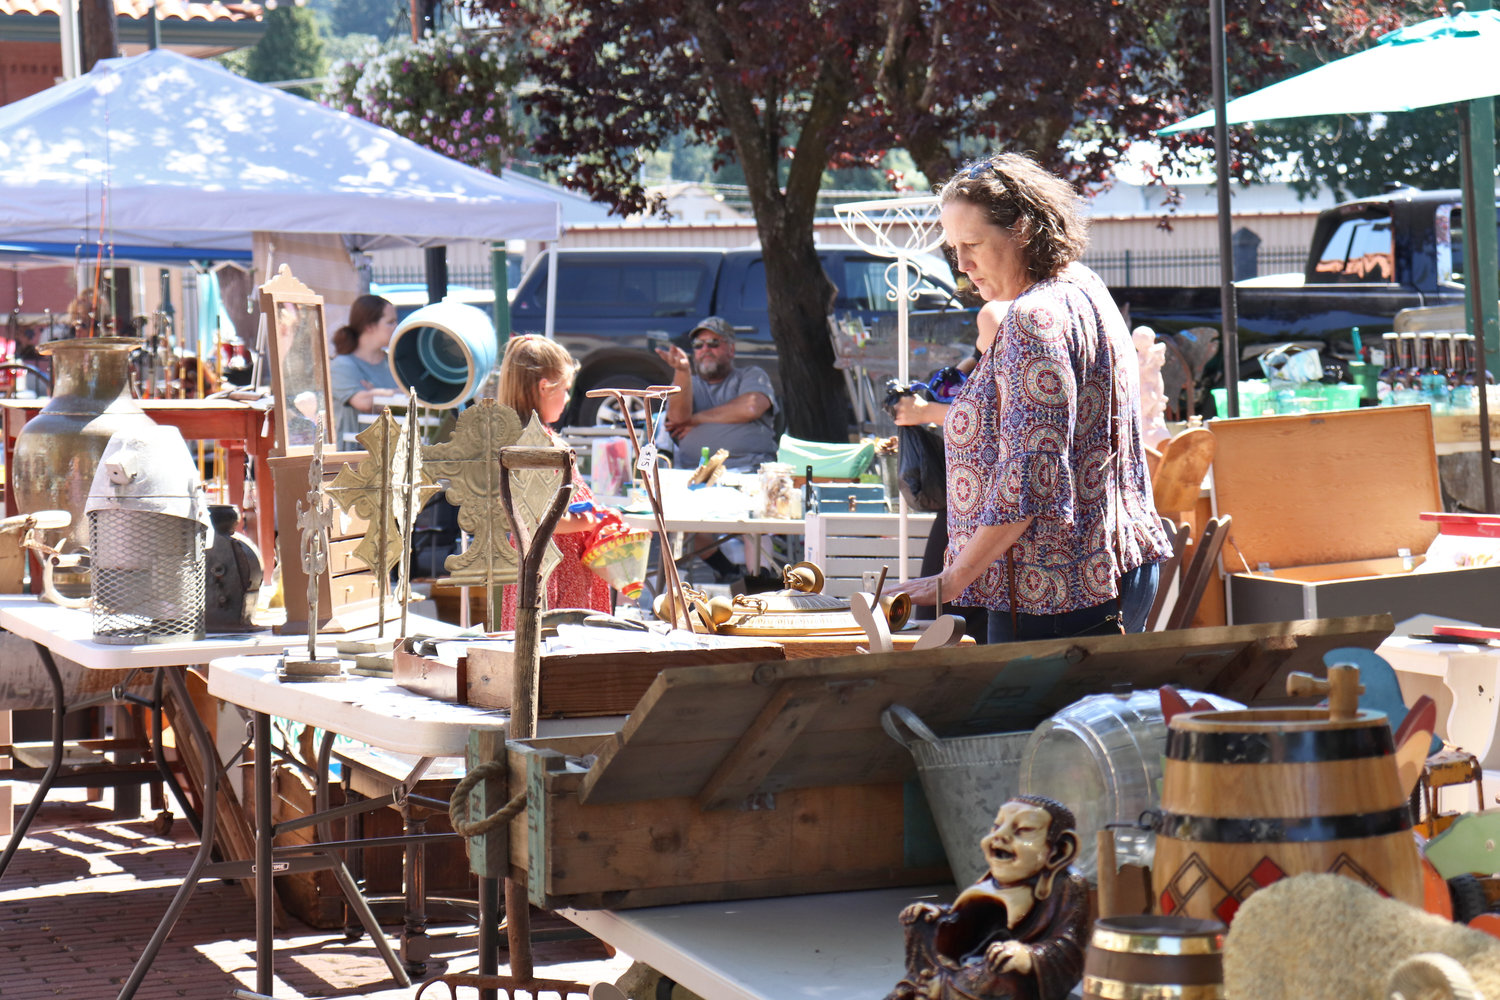 Customers browse the Antique Fest flea market in downtown Centralia on Sunday.